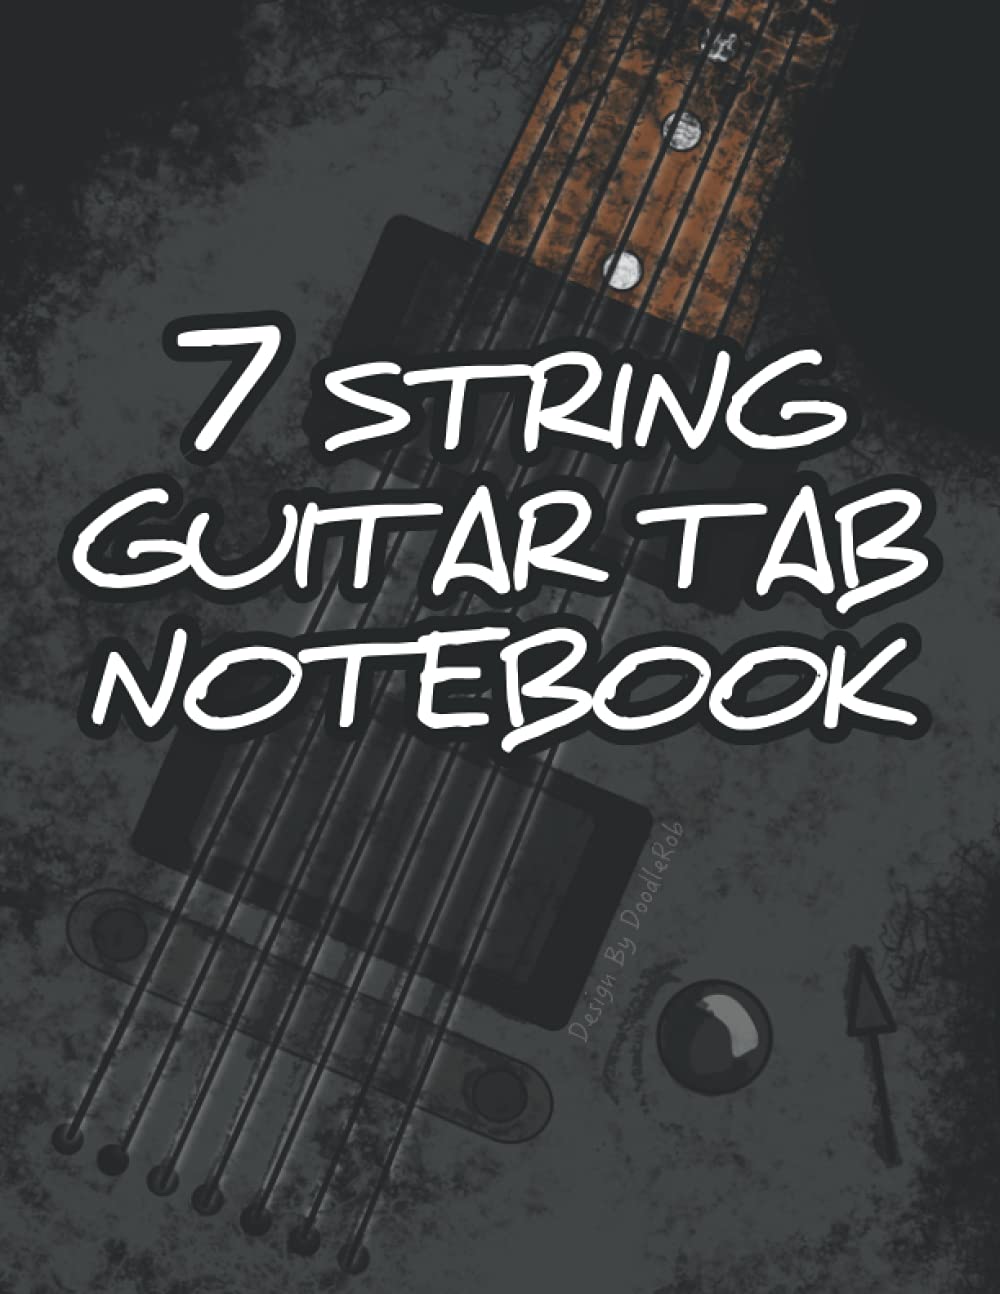 7 String Guitar Tab Notebook 7 String Guitar Tablature With 7 1000x1294